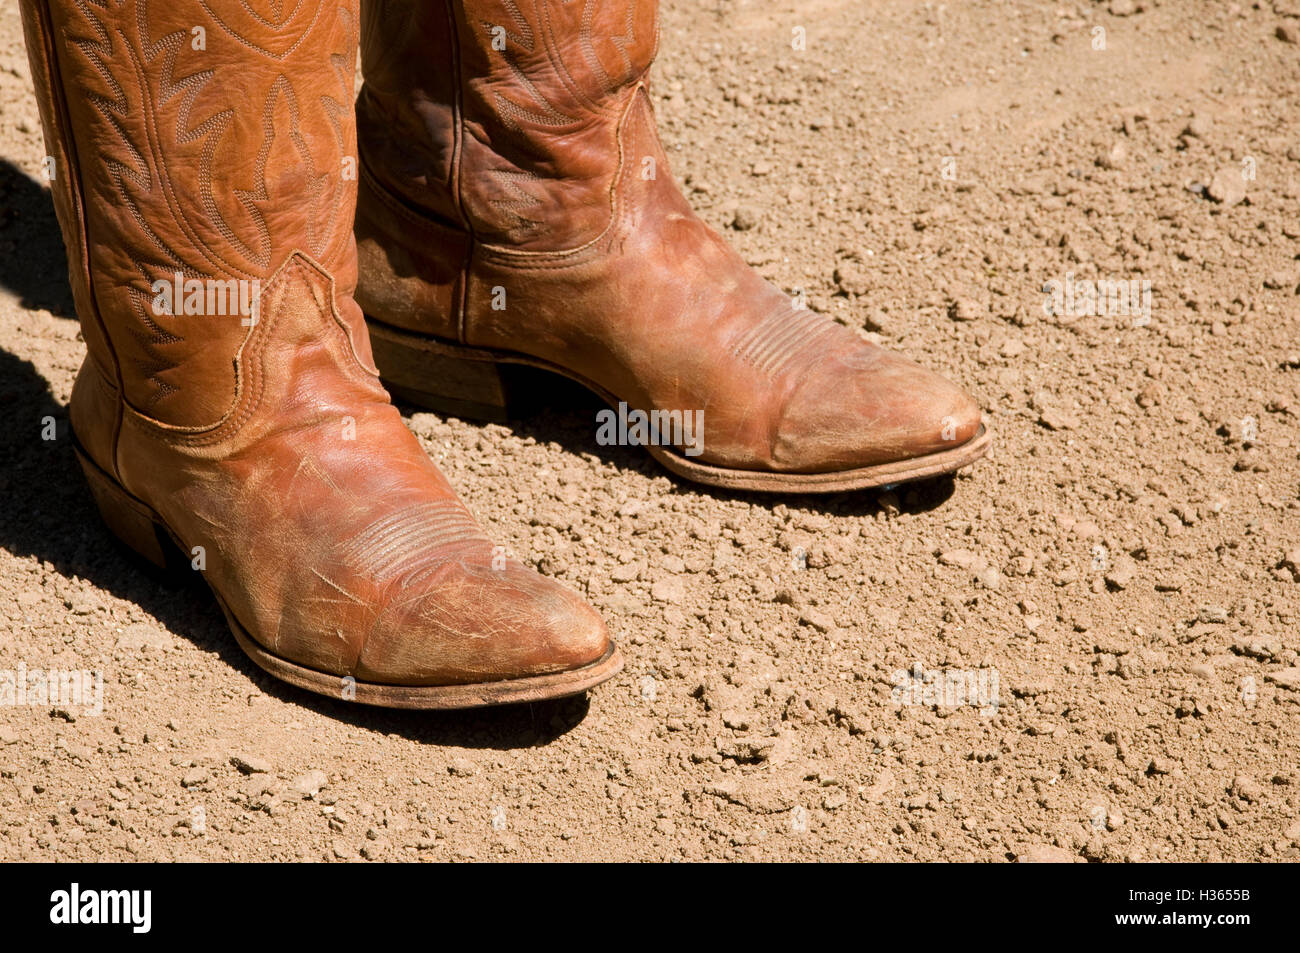 Two dirty western cowboy boots standing on dry dirt Stock Photo